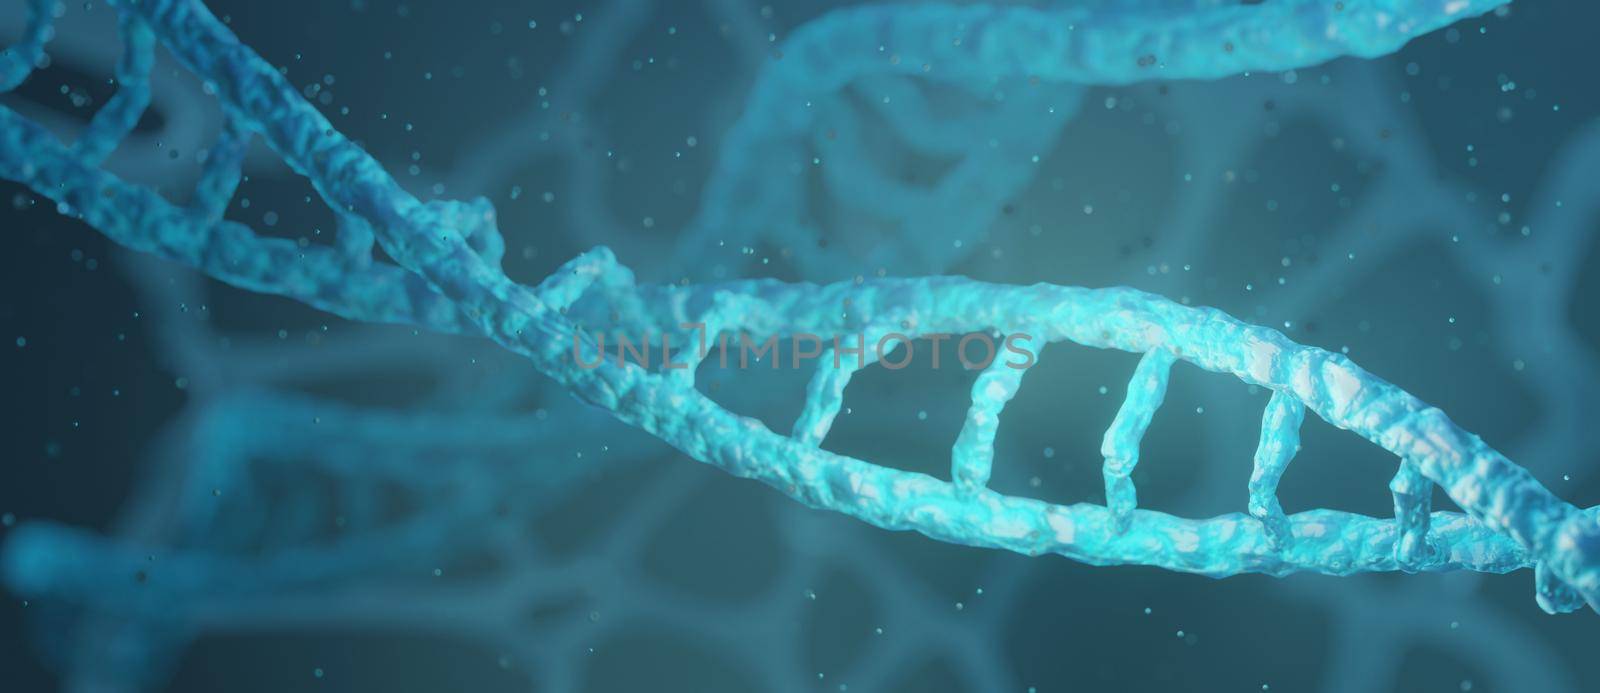 dna structure, abstract background wallpaper 3D Render